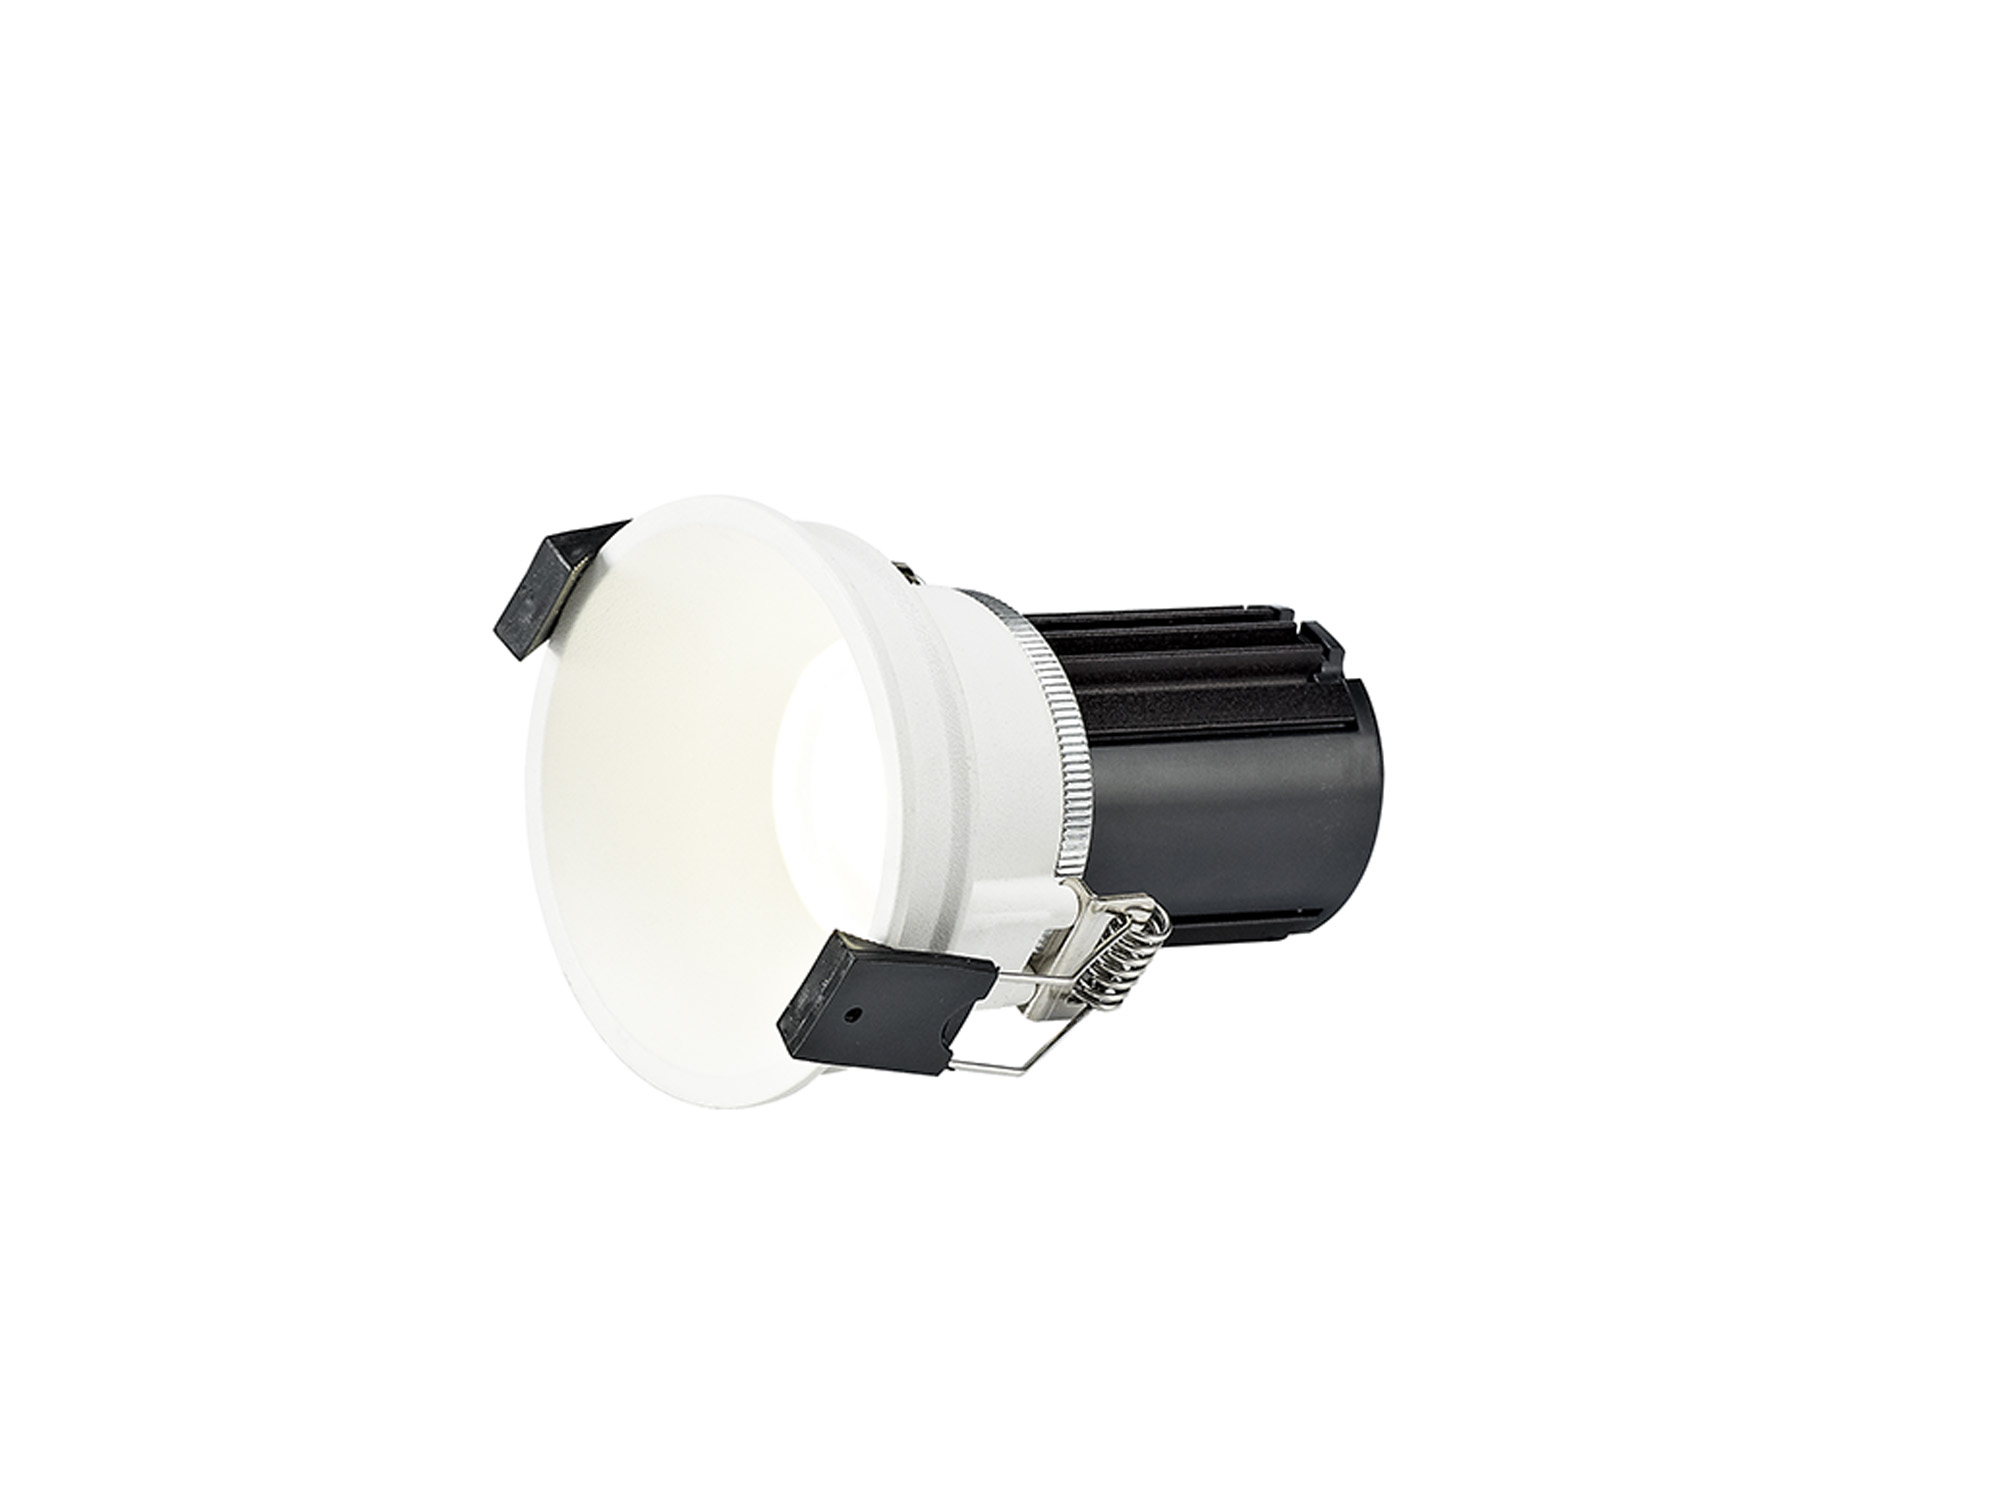 DM201612  Bania 12 Tridonic Powered 12W 3000K 1200lm 36° ; 300mA CRI>90 LED Engine White Fixed Recessed Spotlight; Cut Out: 76mm; IP20; 5yrs Warranty